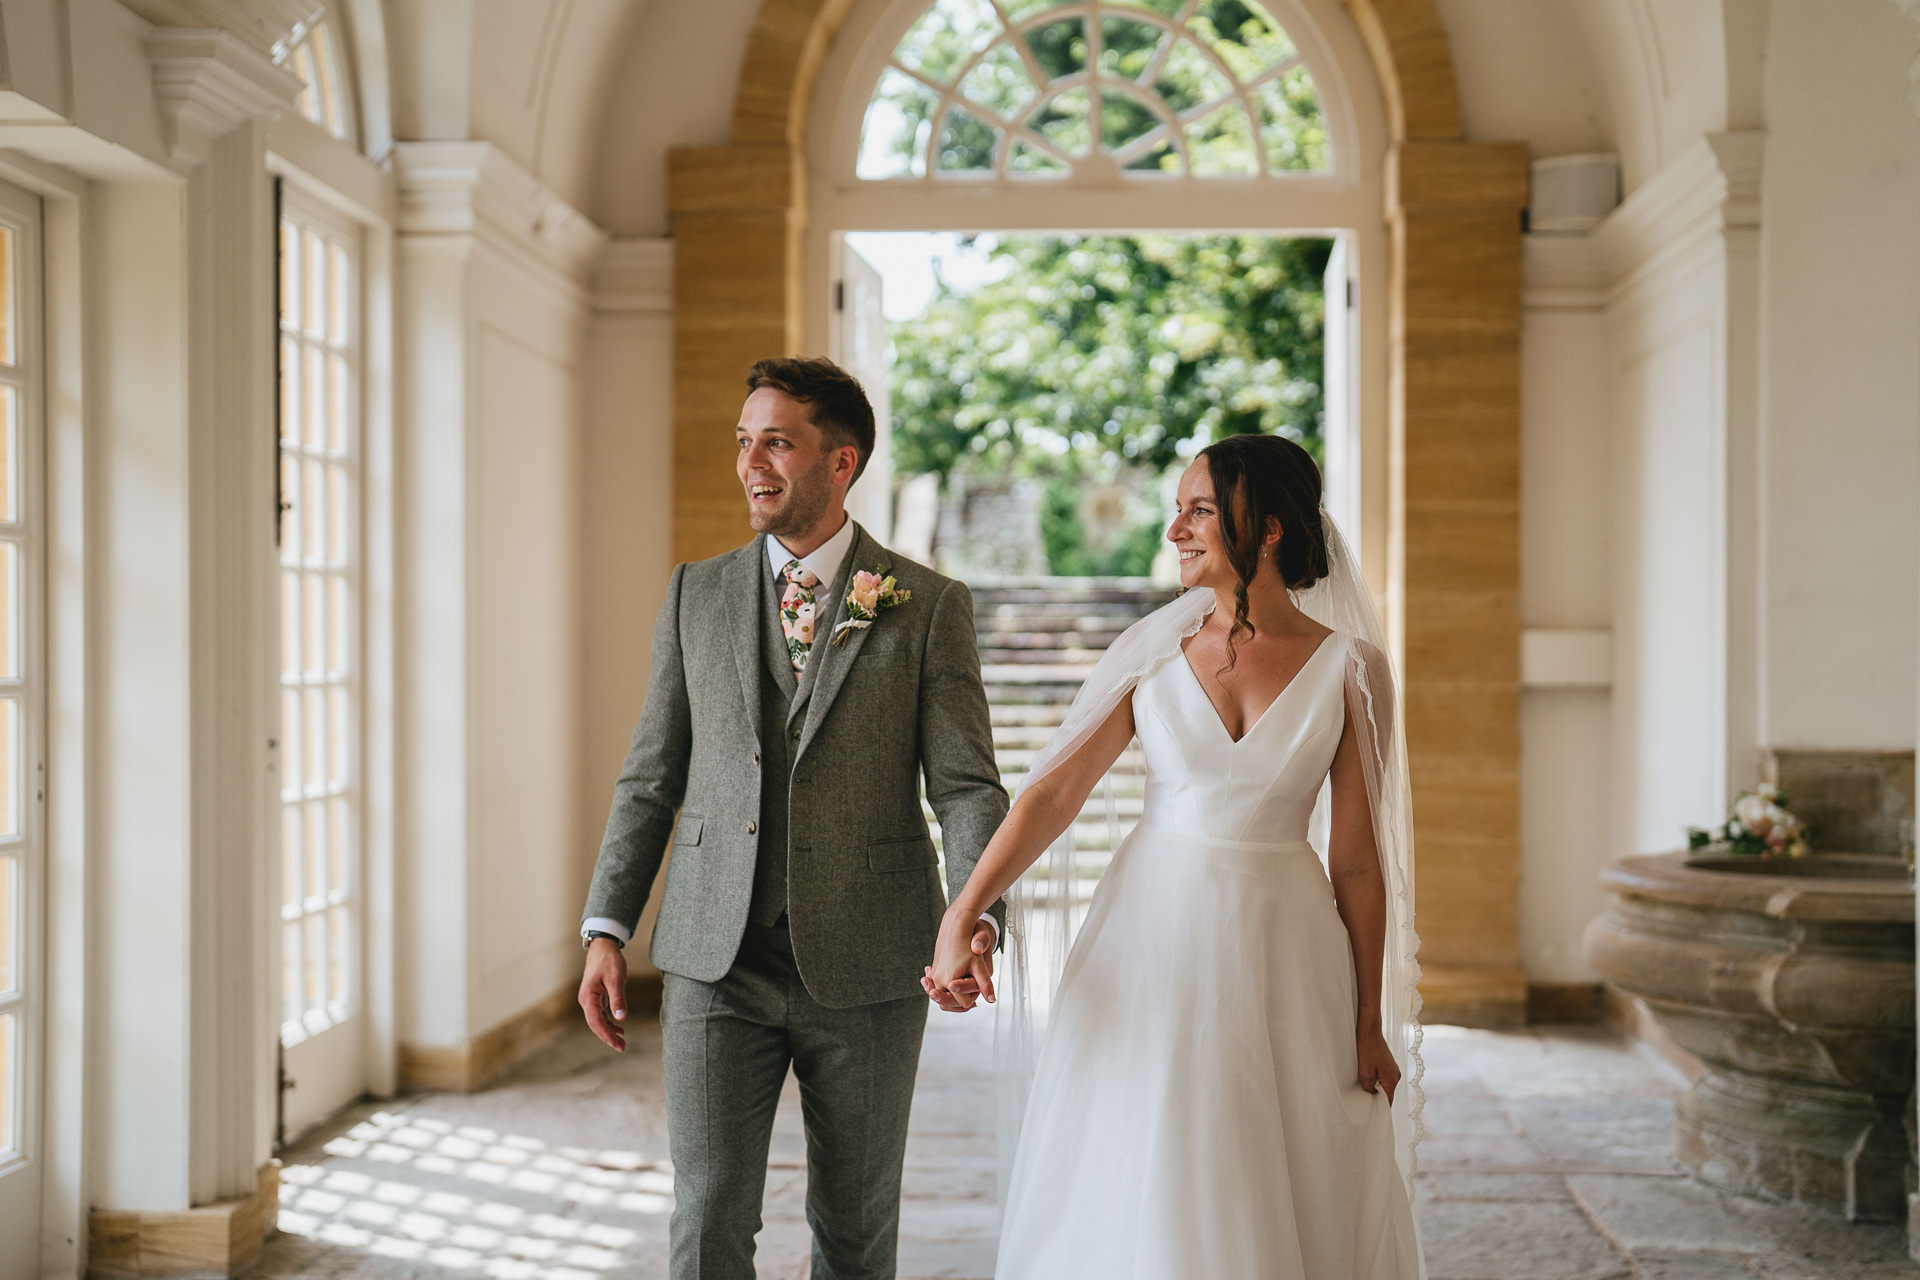 A bride and groom walking together smiling through the orangery at Hestercombe